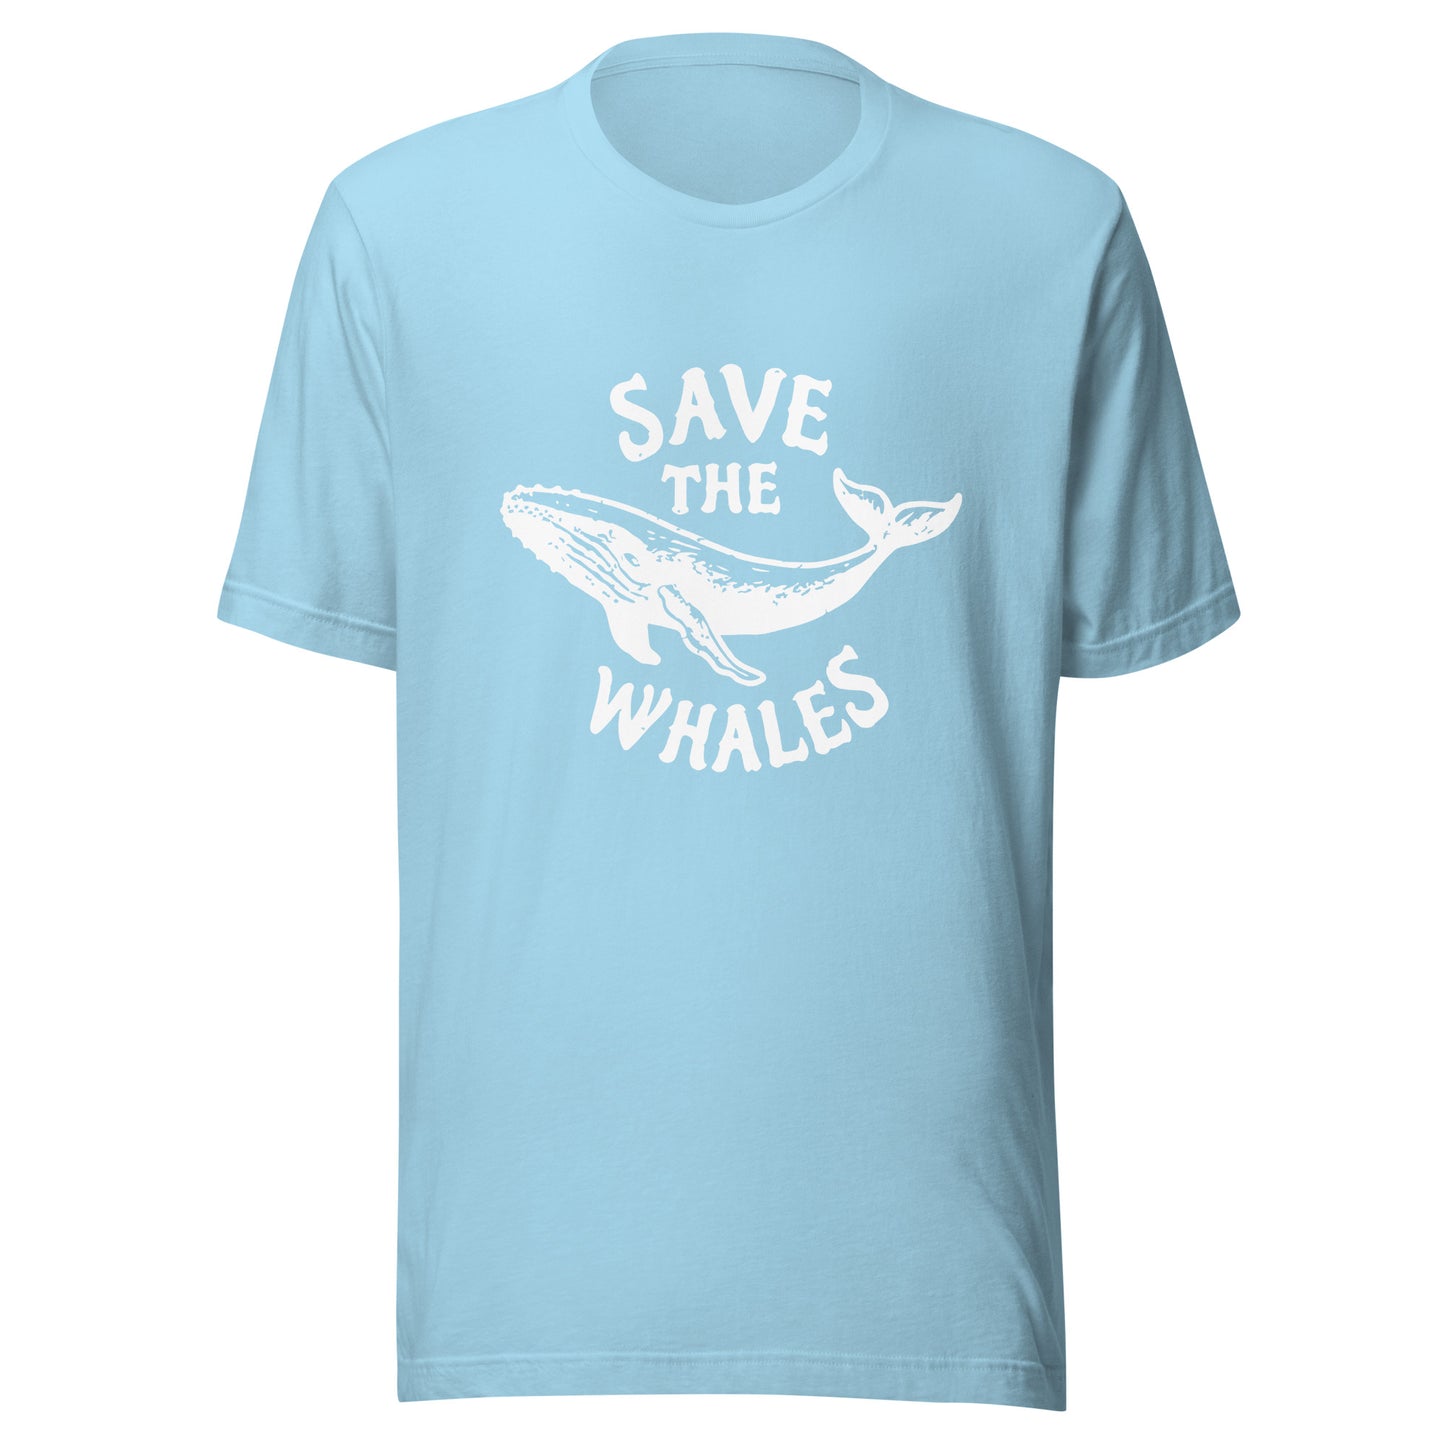 Make a Statement for the Oceans: Eco-Conscious Graphic Tee